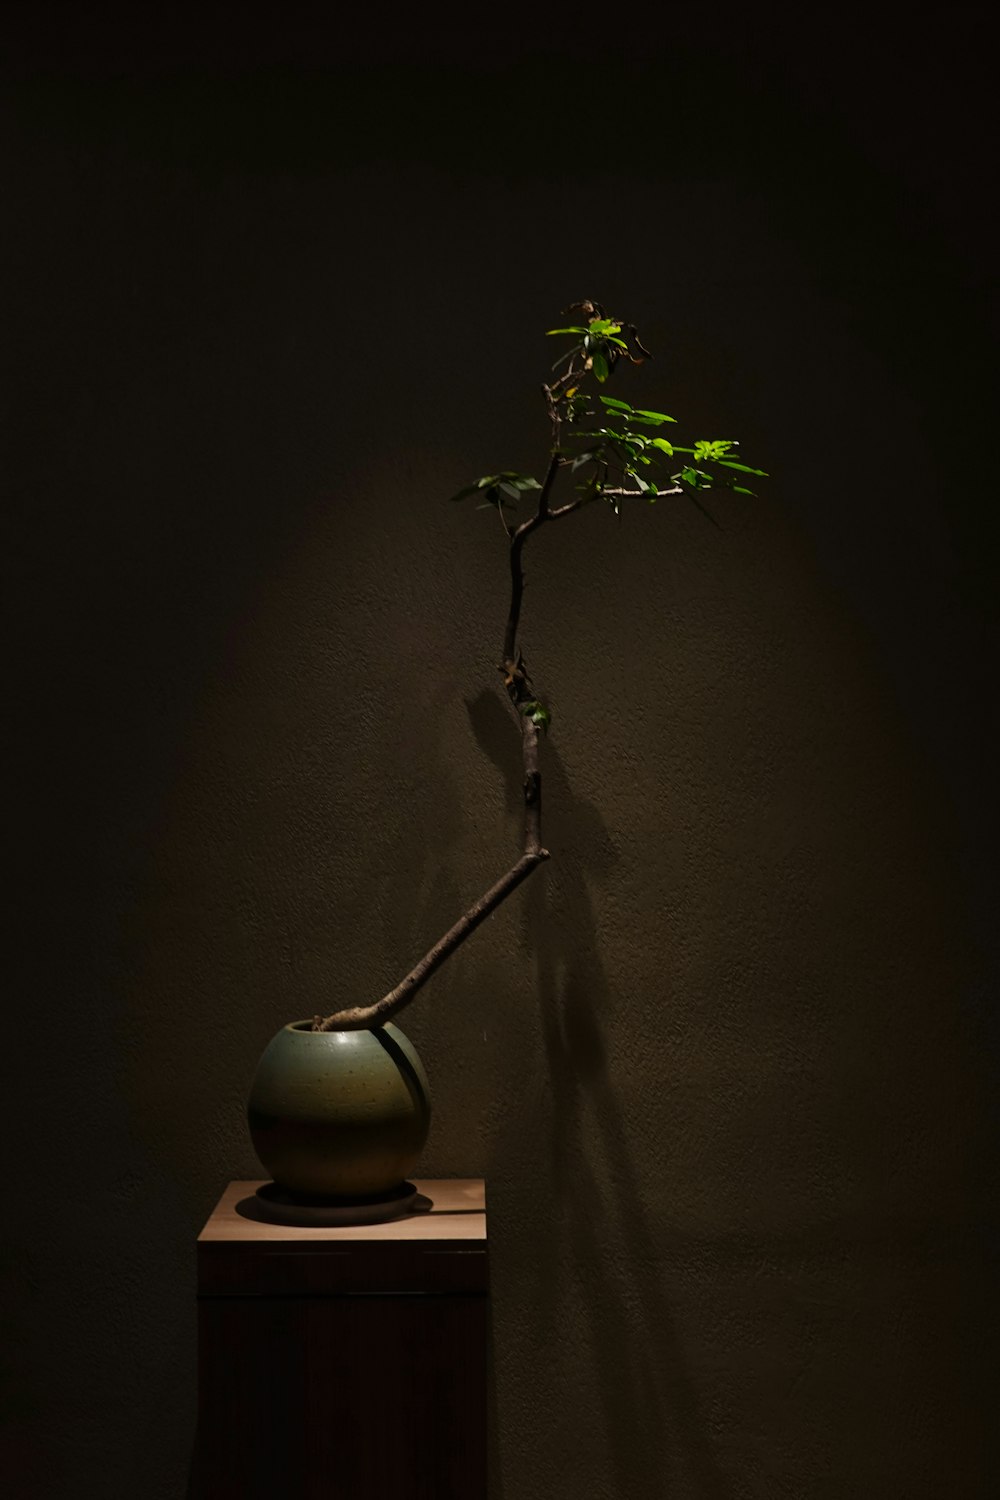 a bonsai tree in a vase on a table